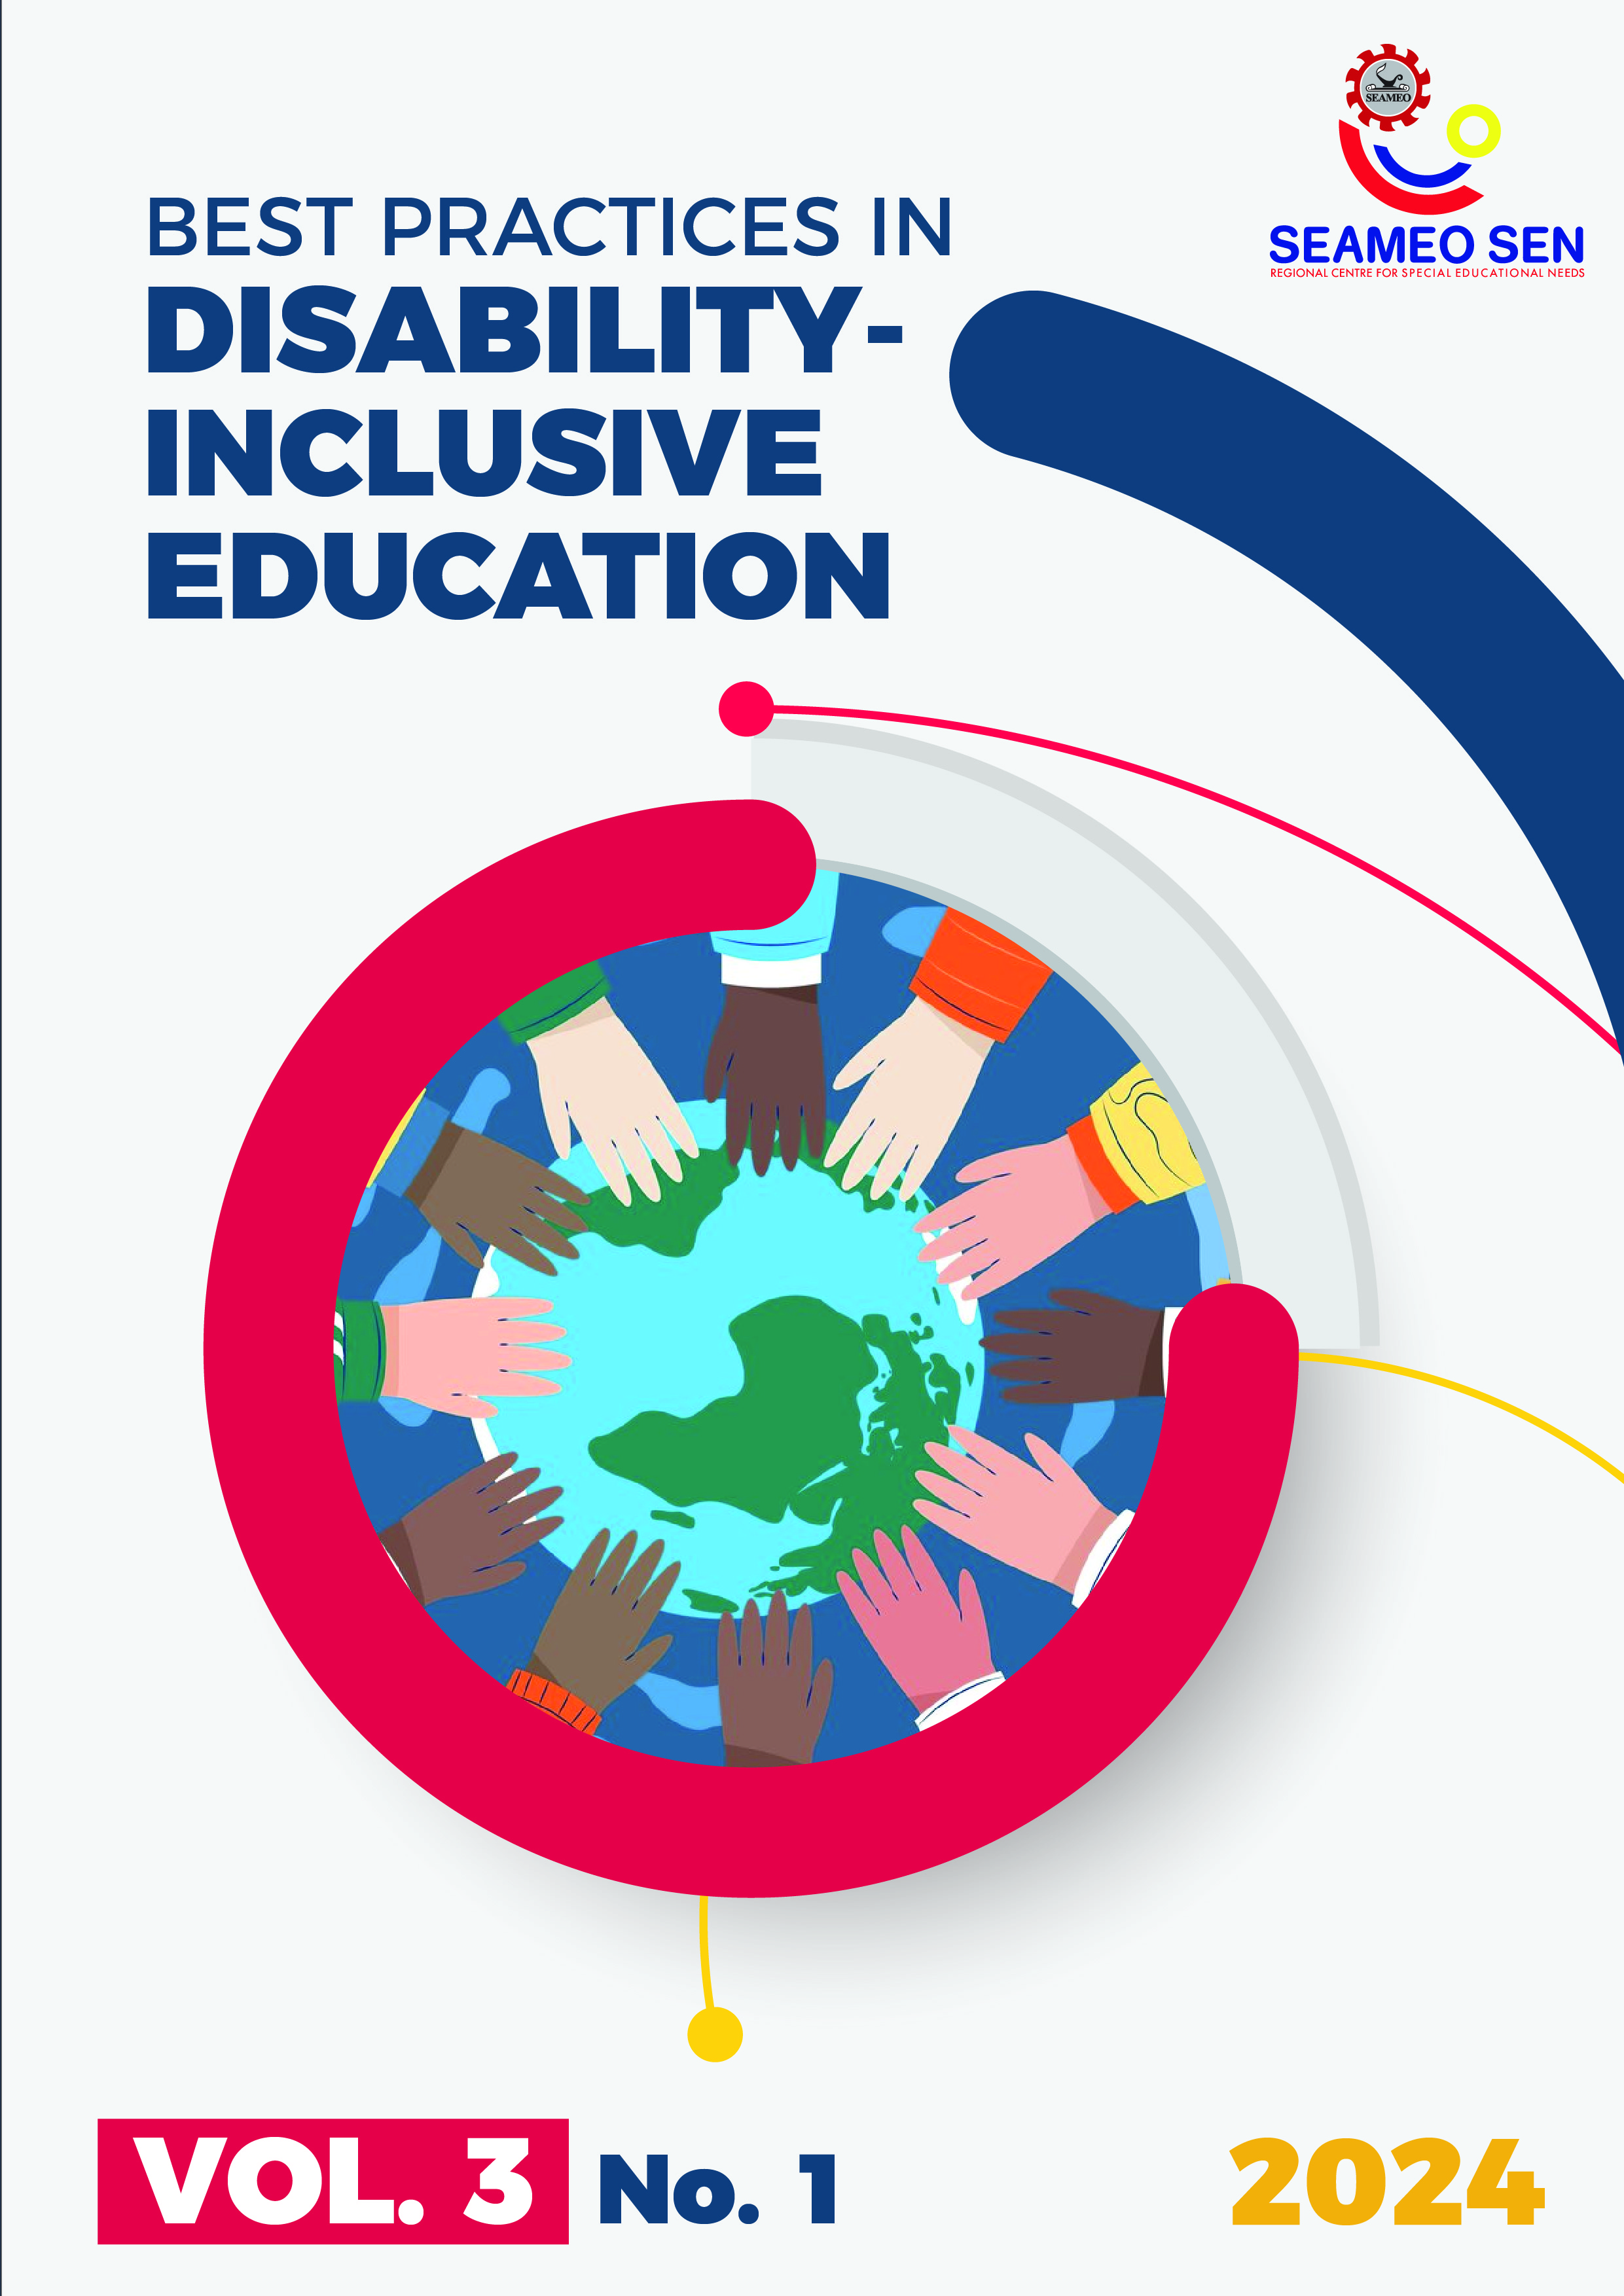 					View Vol. 3 No. 1 (2024): Best Practices in Disability-Inclusive Education
				